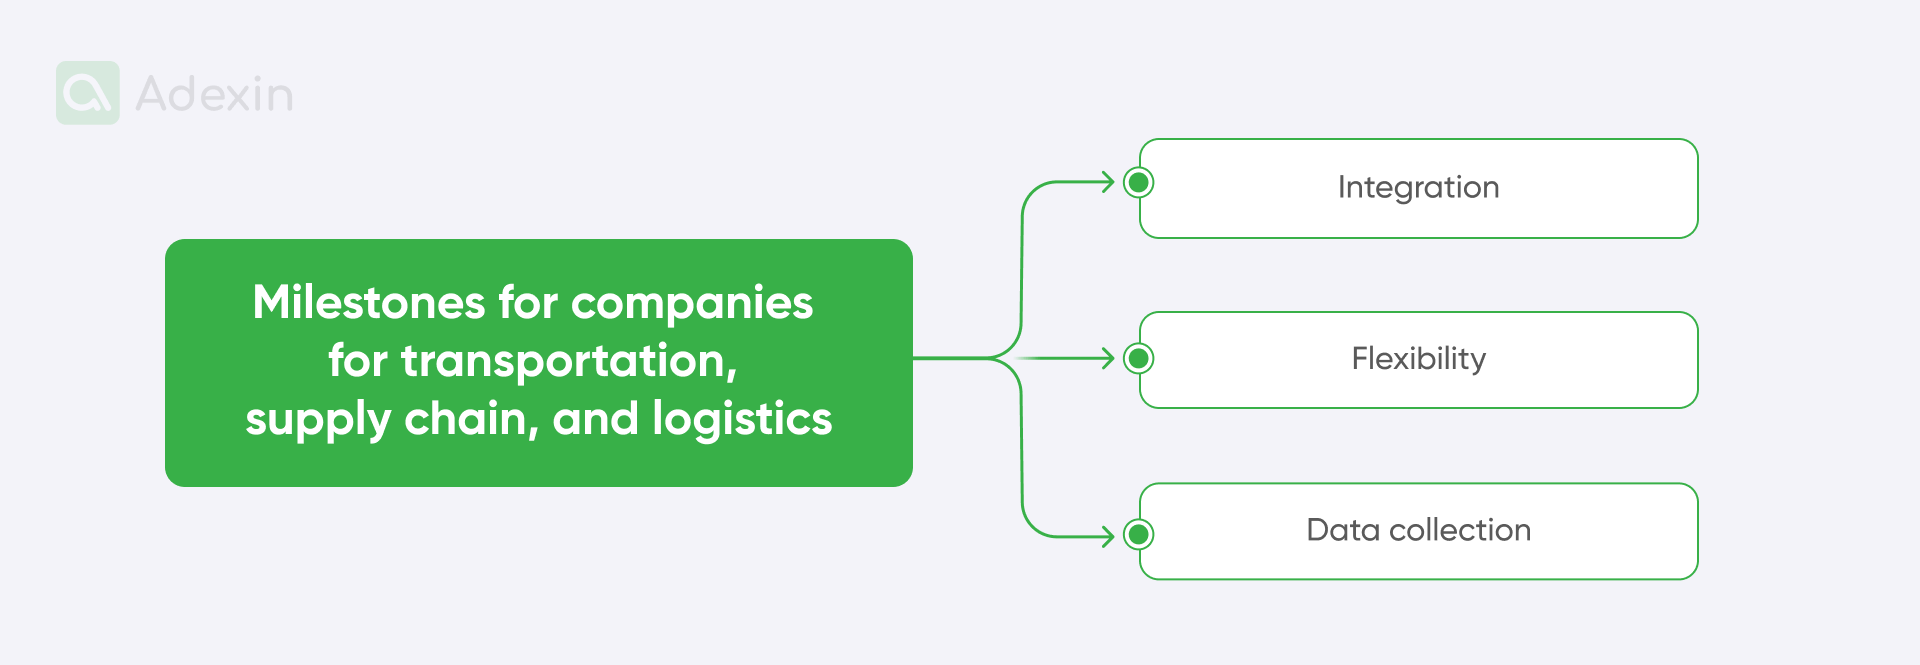 Milestones for companies operating in transportation, supply chain, and logistics